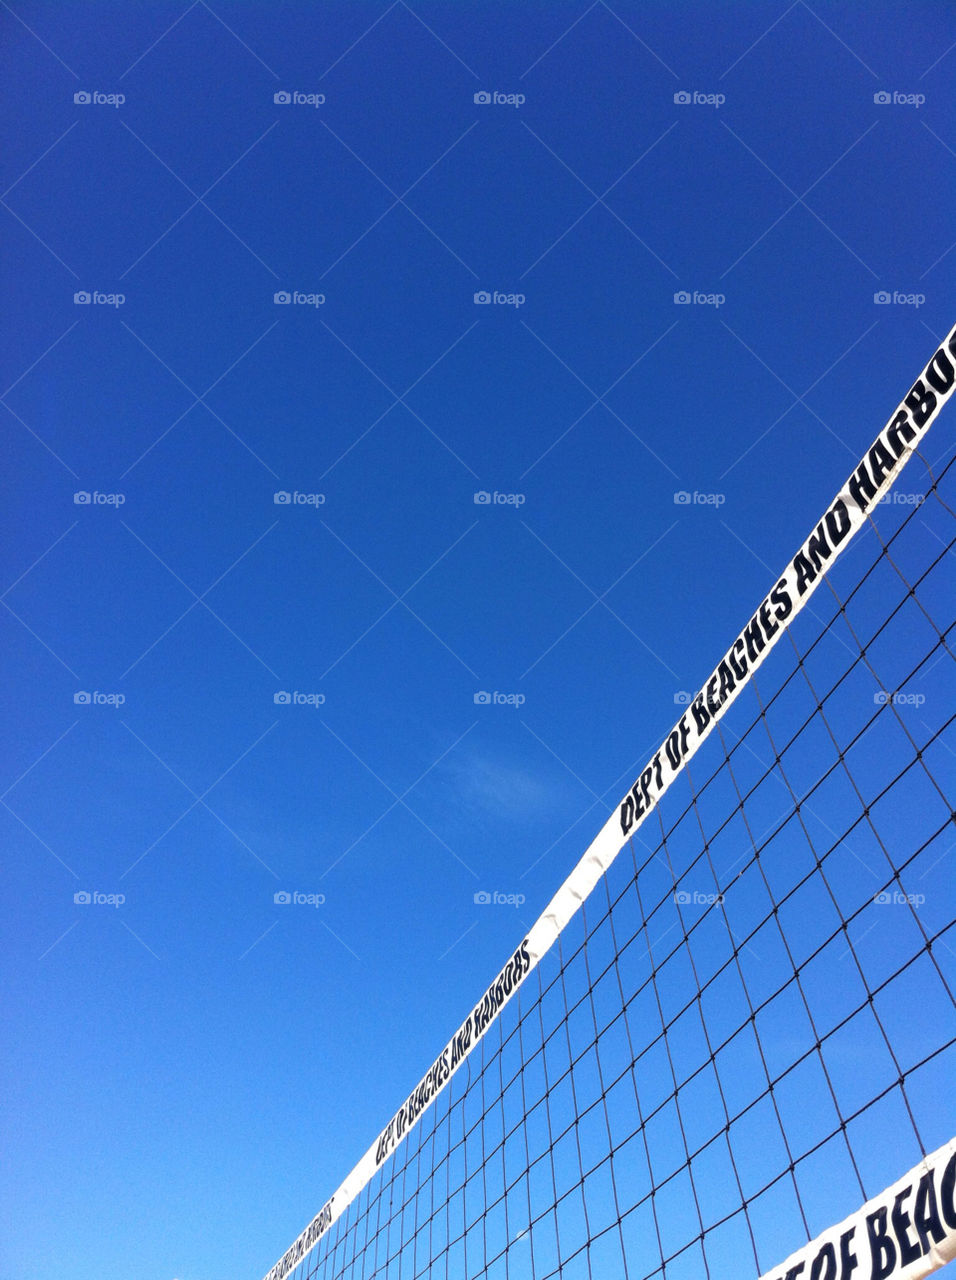 volleyball net against the sky